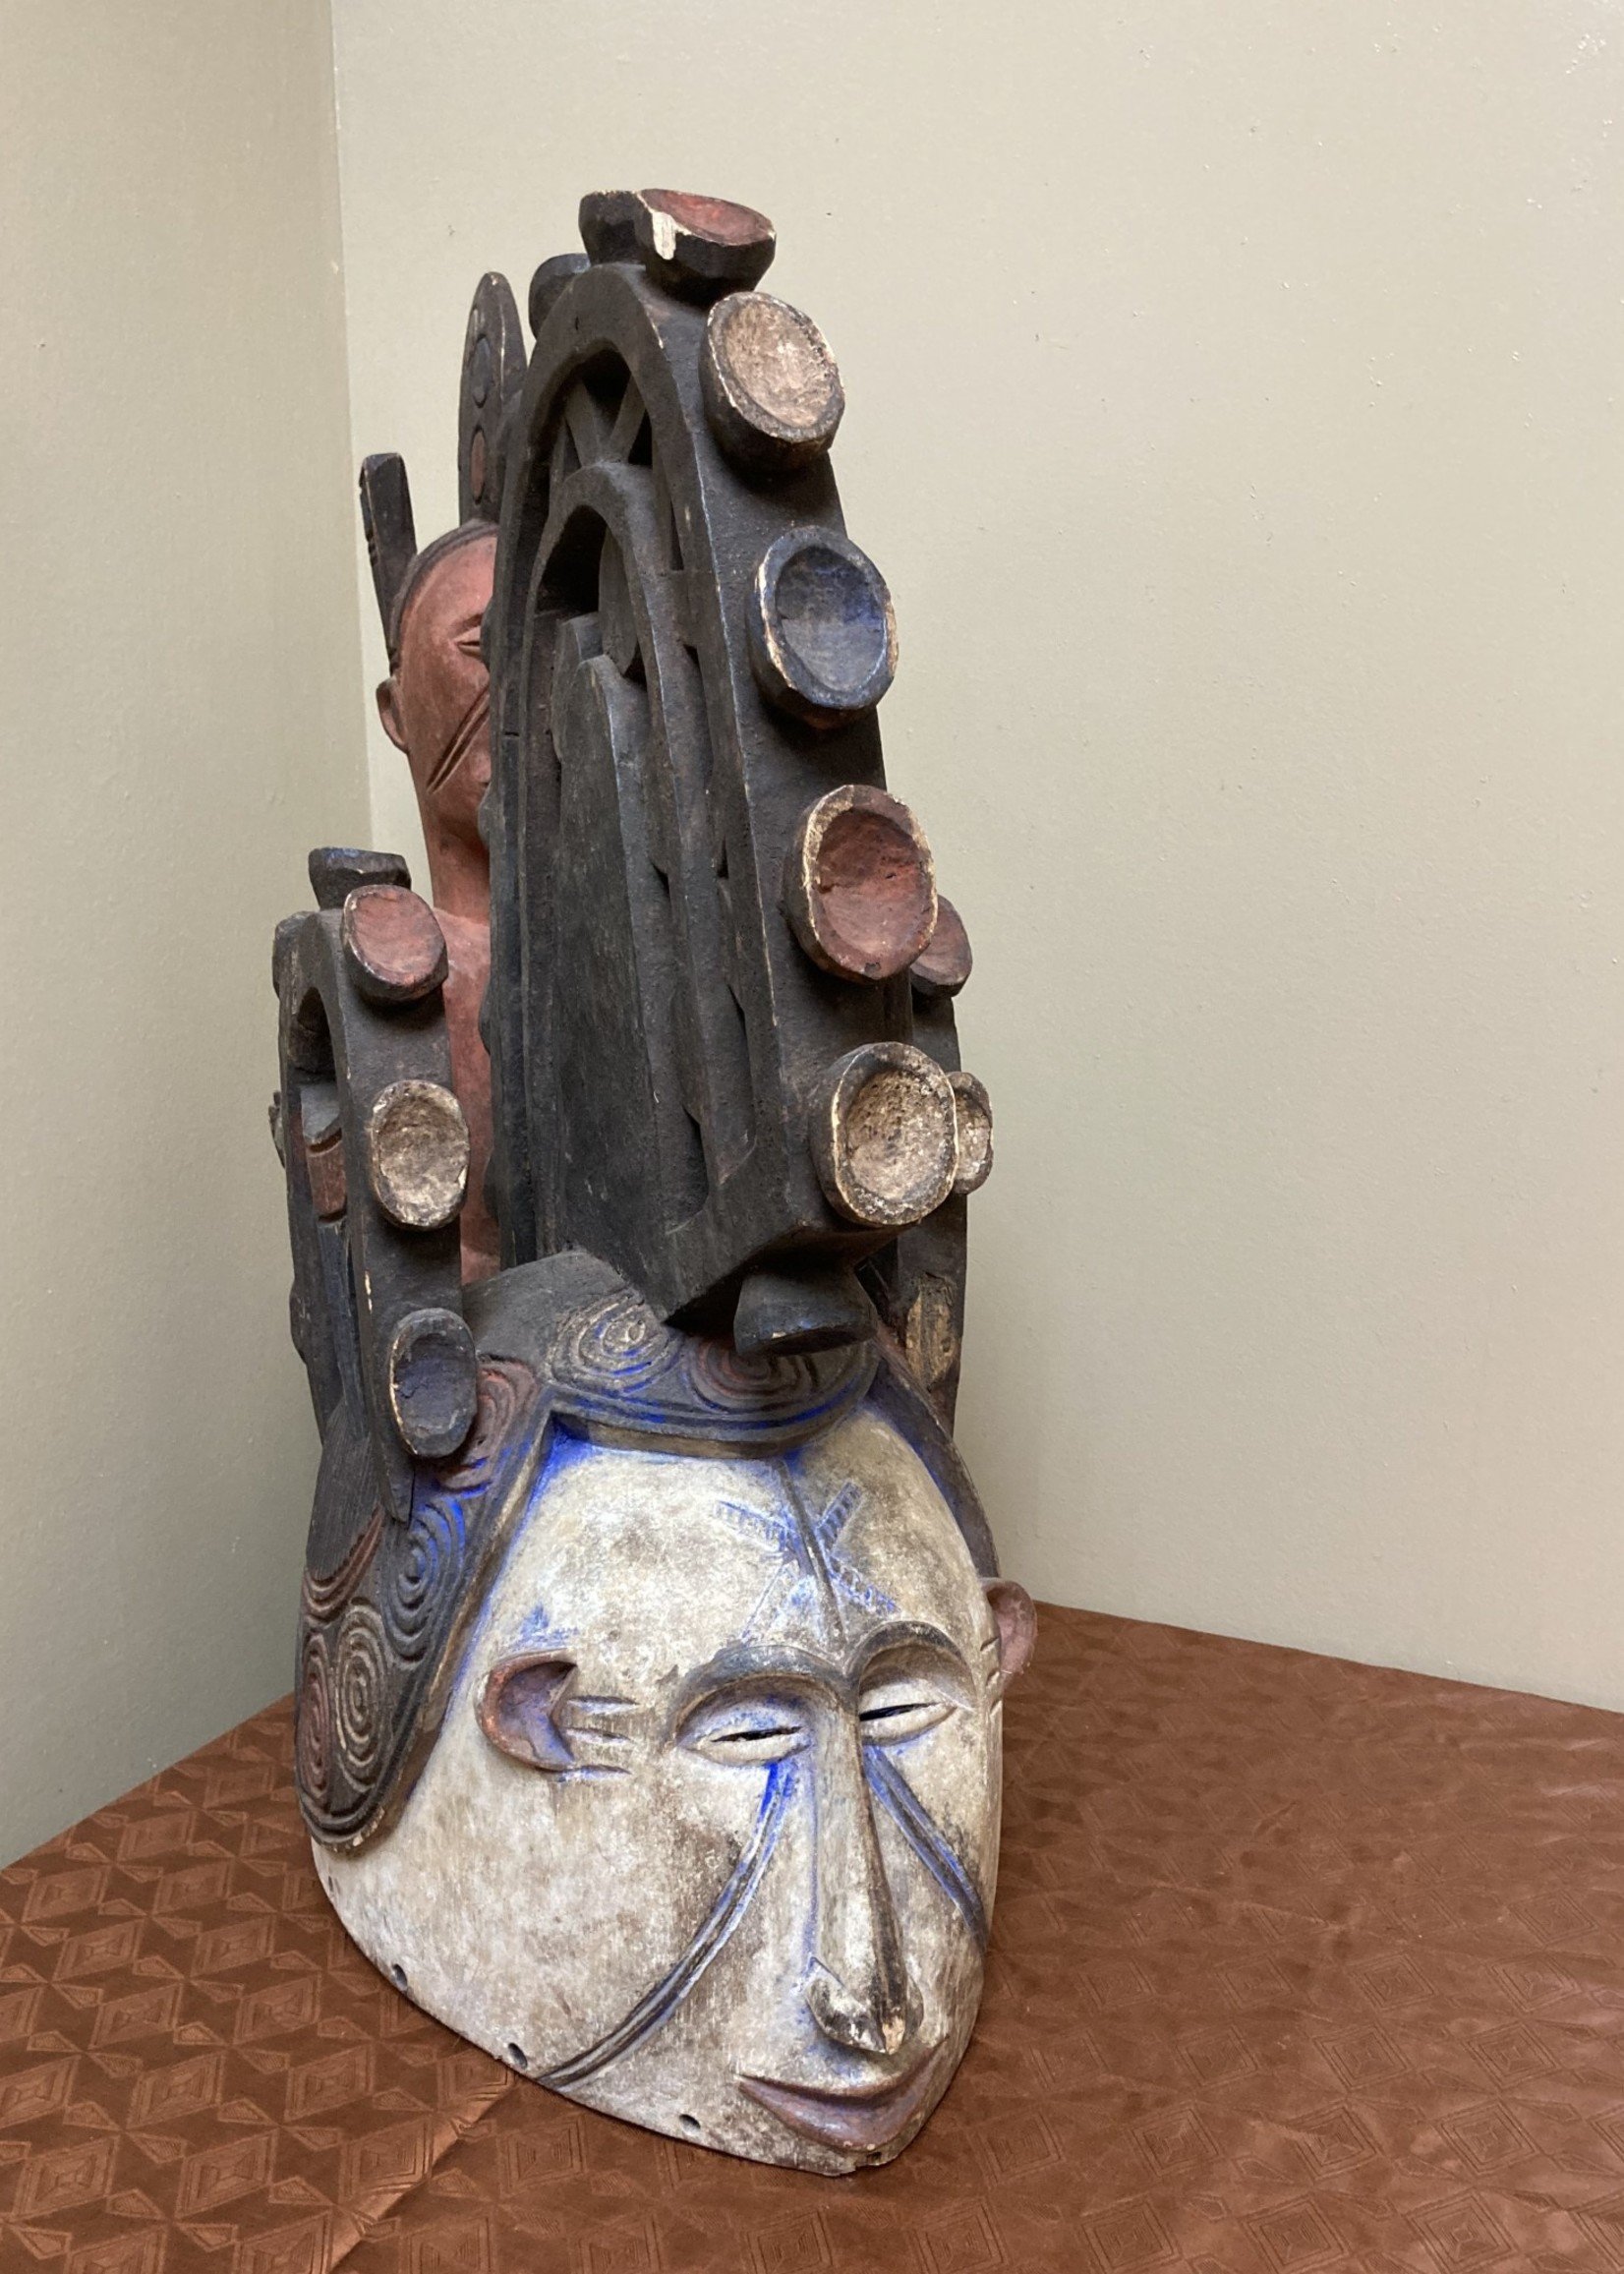 Ibo Ibo (Igbo) “Spirit Maiden” mask representing a beautiful young maiden. These masks are danced by men. The Ibo live in the south east of nigeria. 22" tall x 17 1/2" deep x 7" w. $435